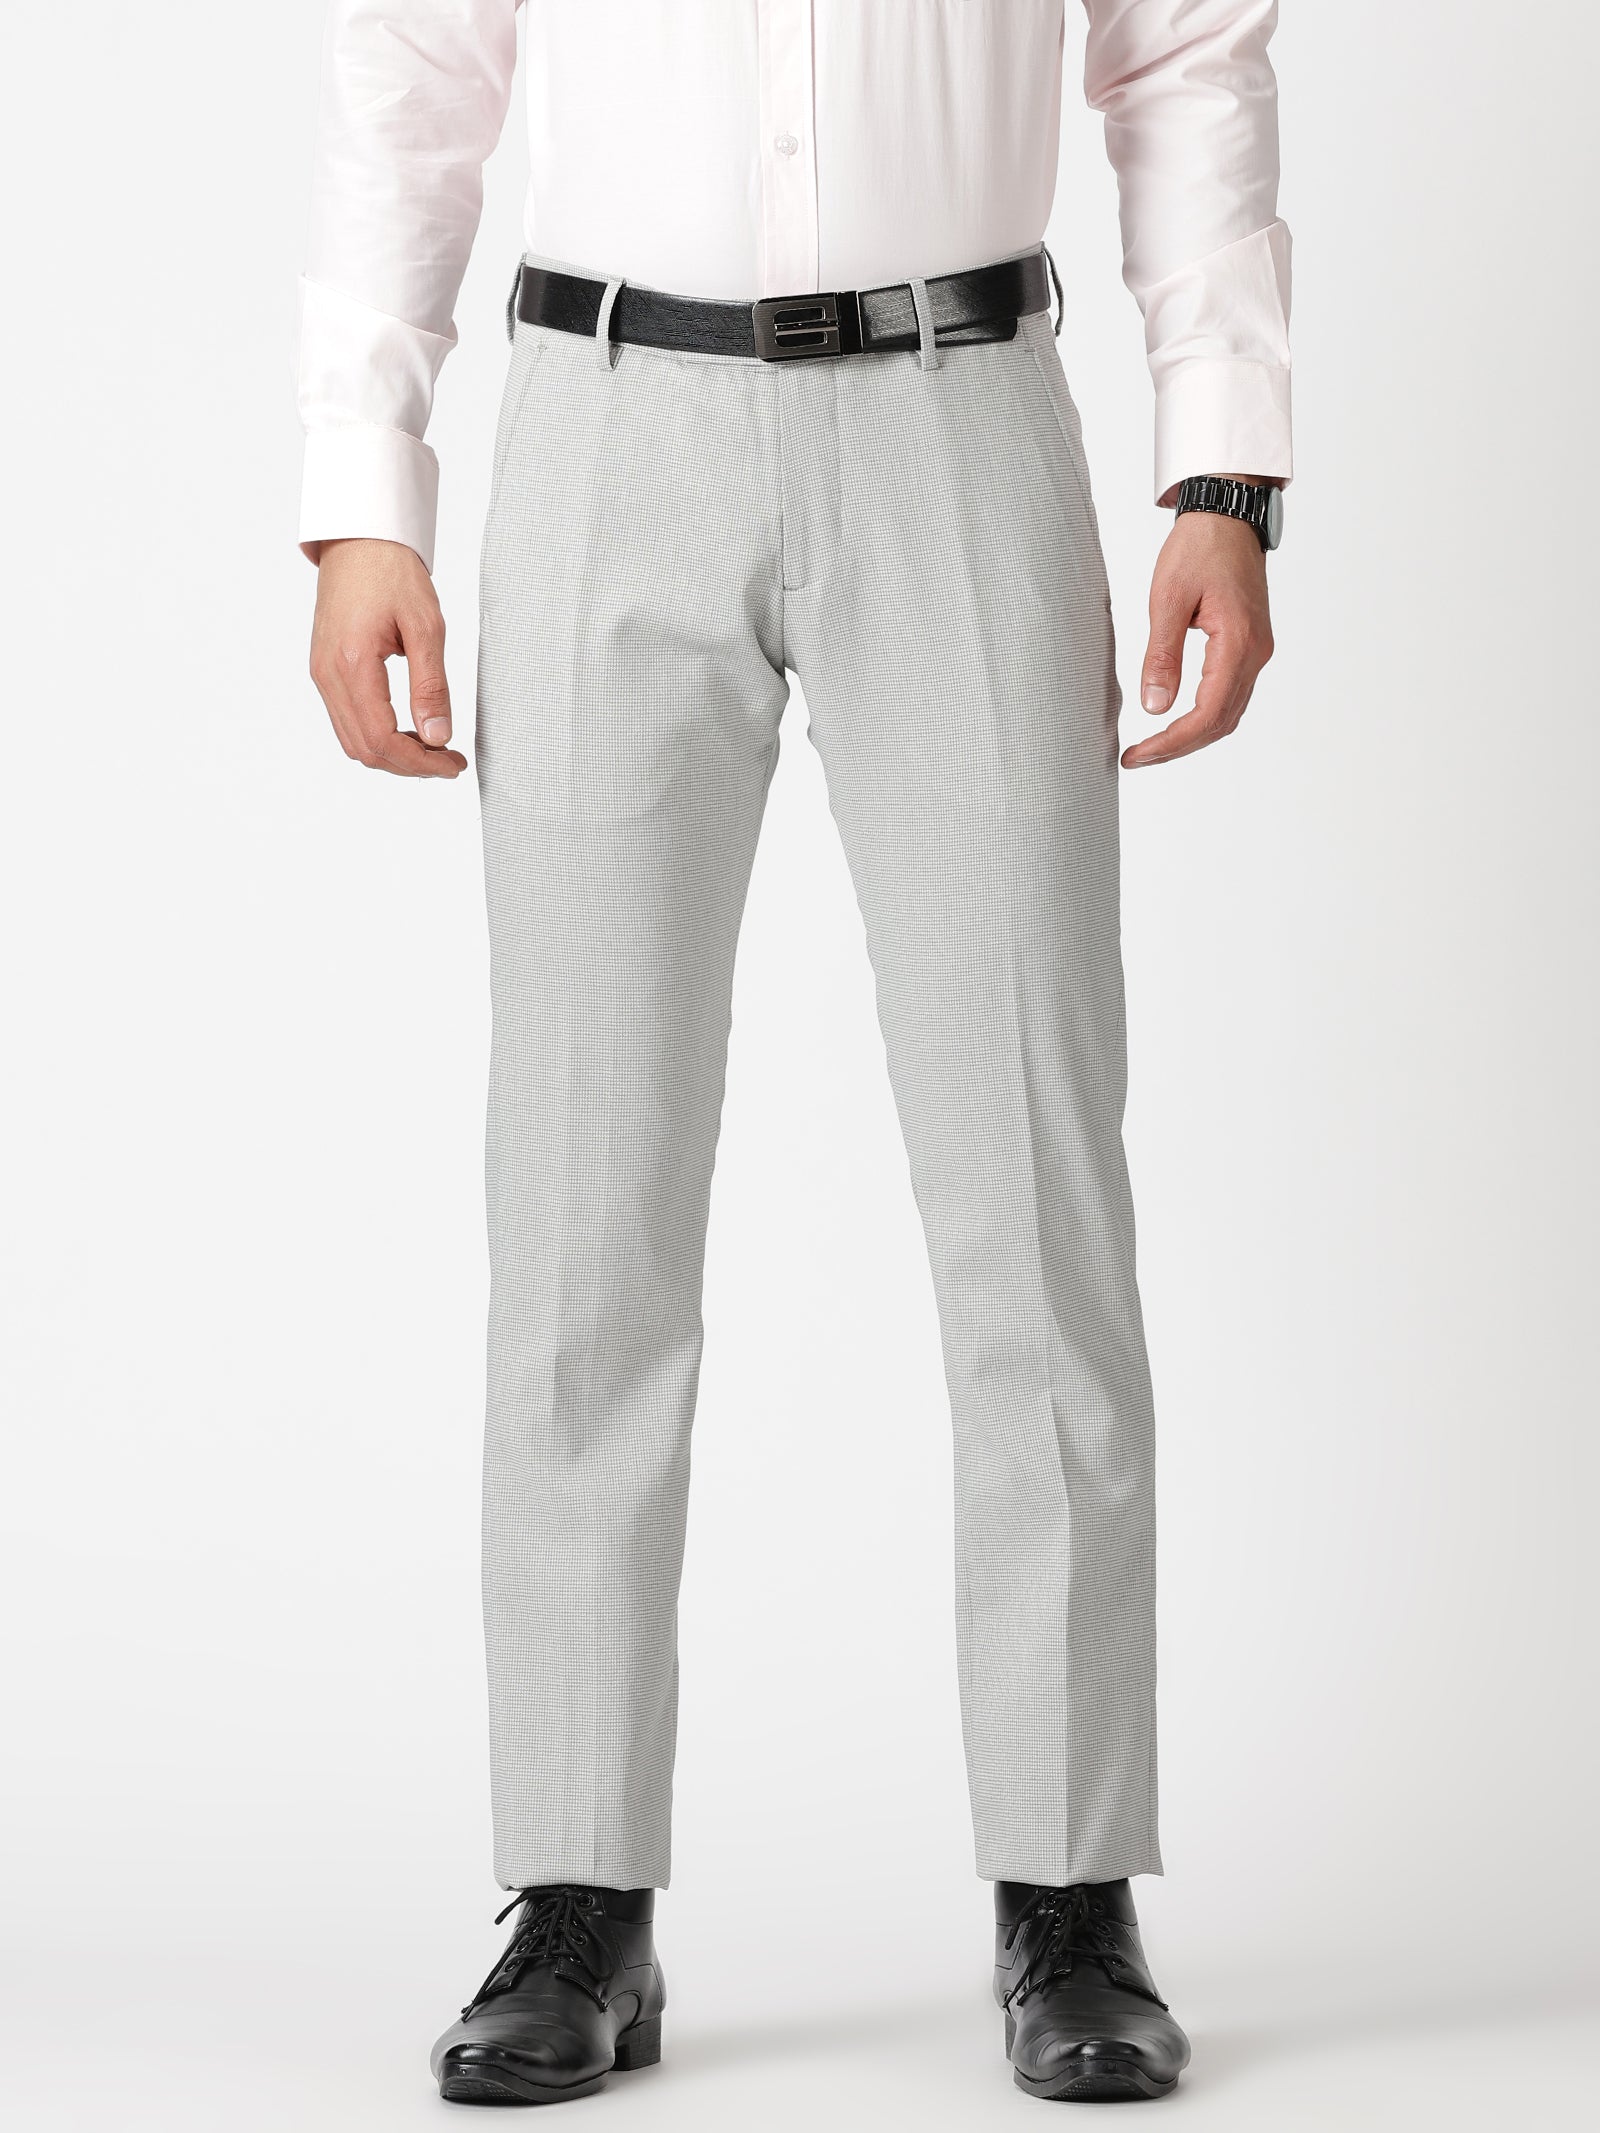 Summer Men's Naples Pants Grey Suit Pants High Waist Trousers Casual  Pleated New | eBay